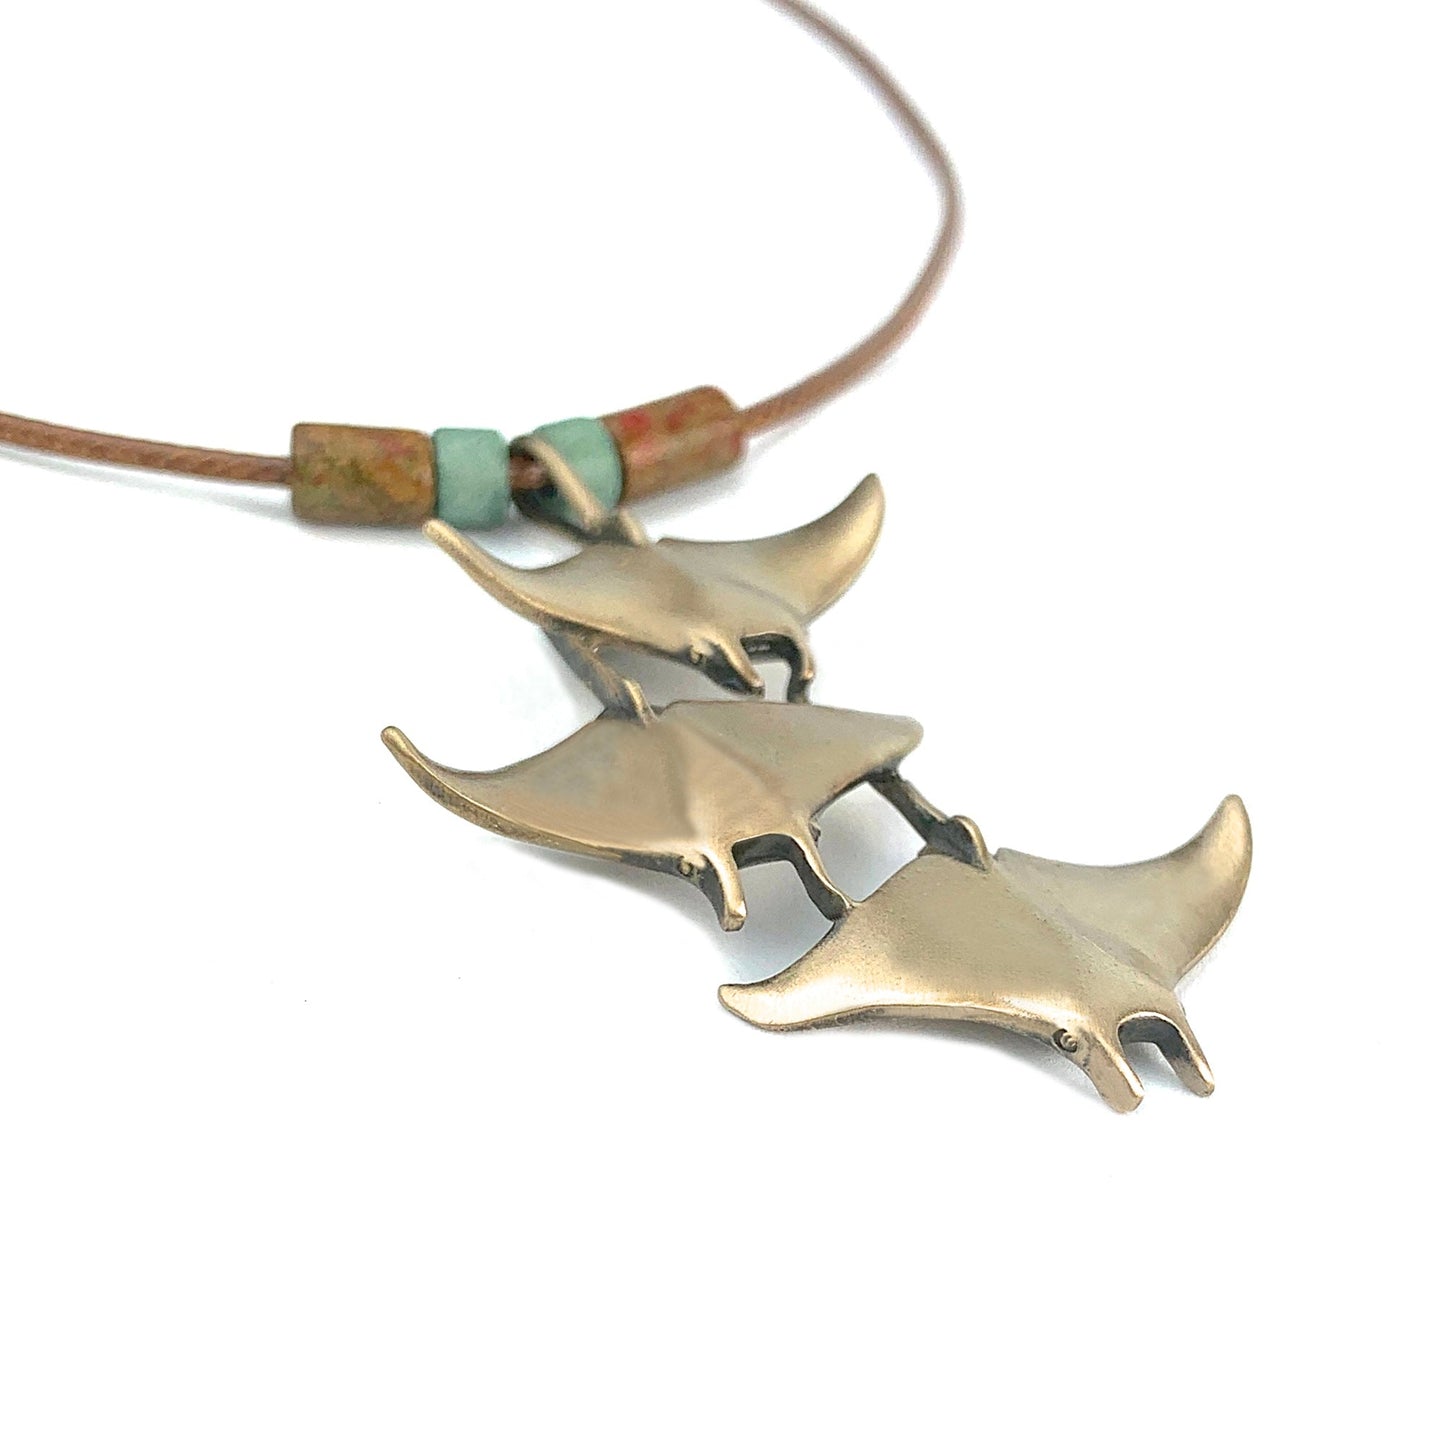 Manta Ray Necklace Antique Bronze- Stingray Jewelry, Manta Ray Pendant, Scuba Diving Jewelry, Ocean Inspired Bronze Jewelry - The Tool Store